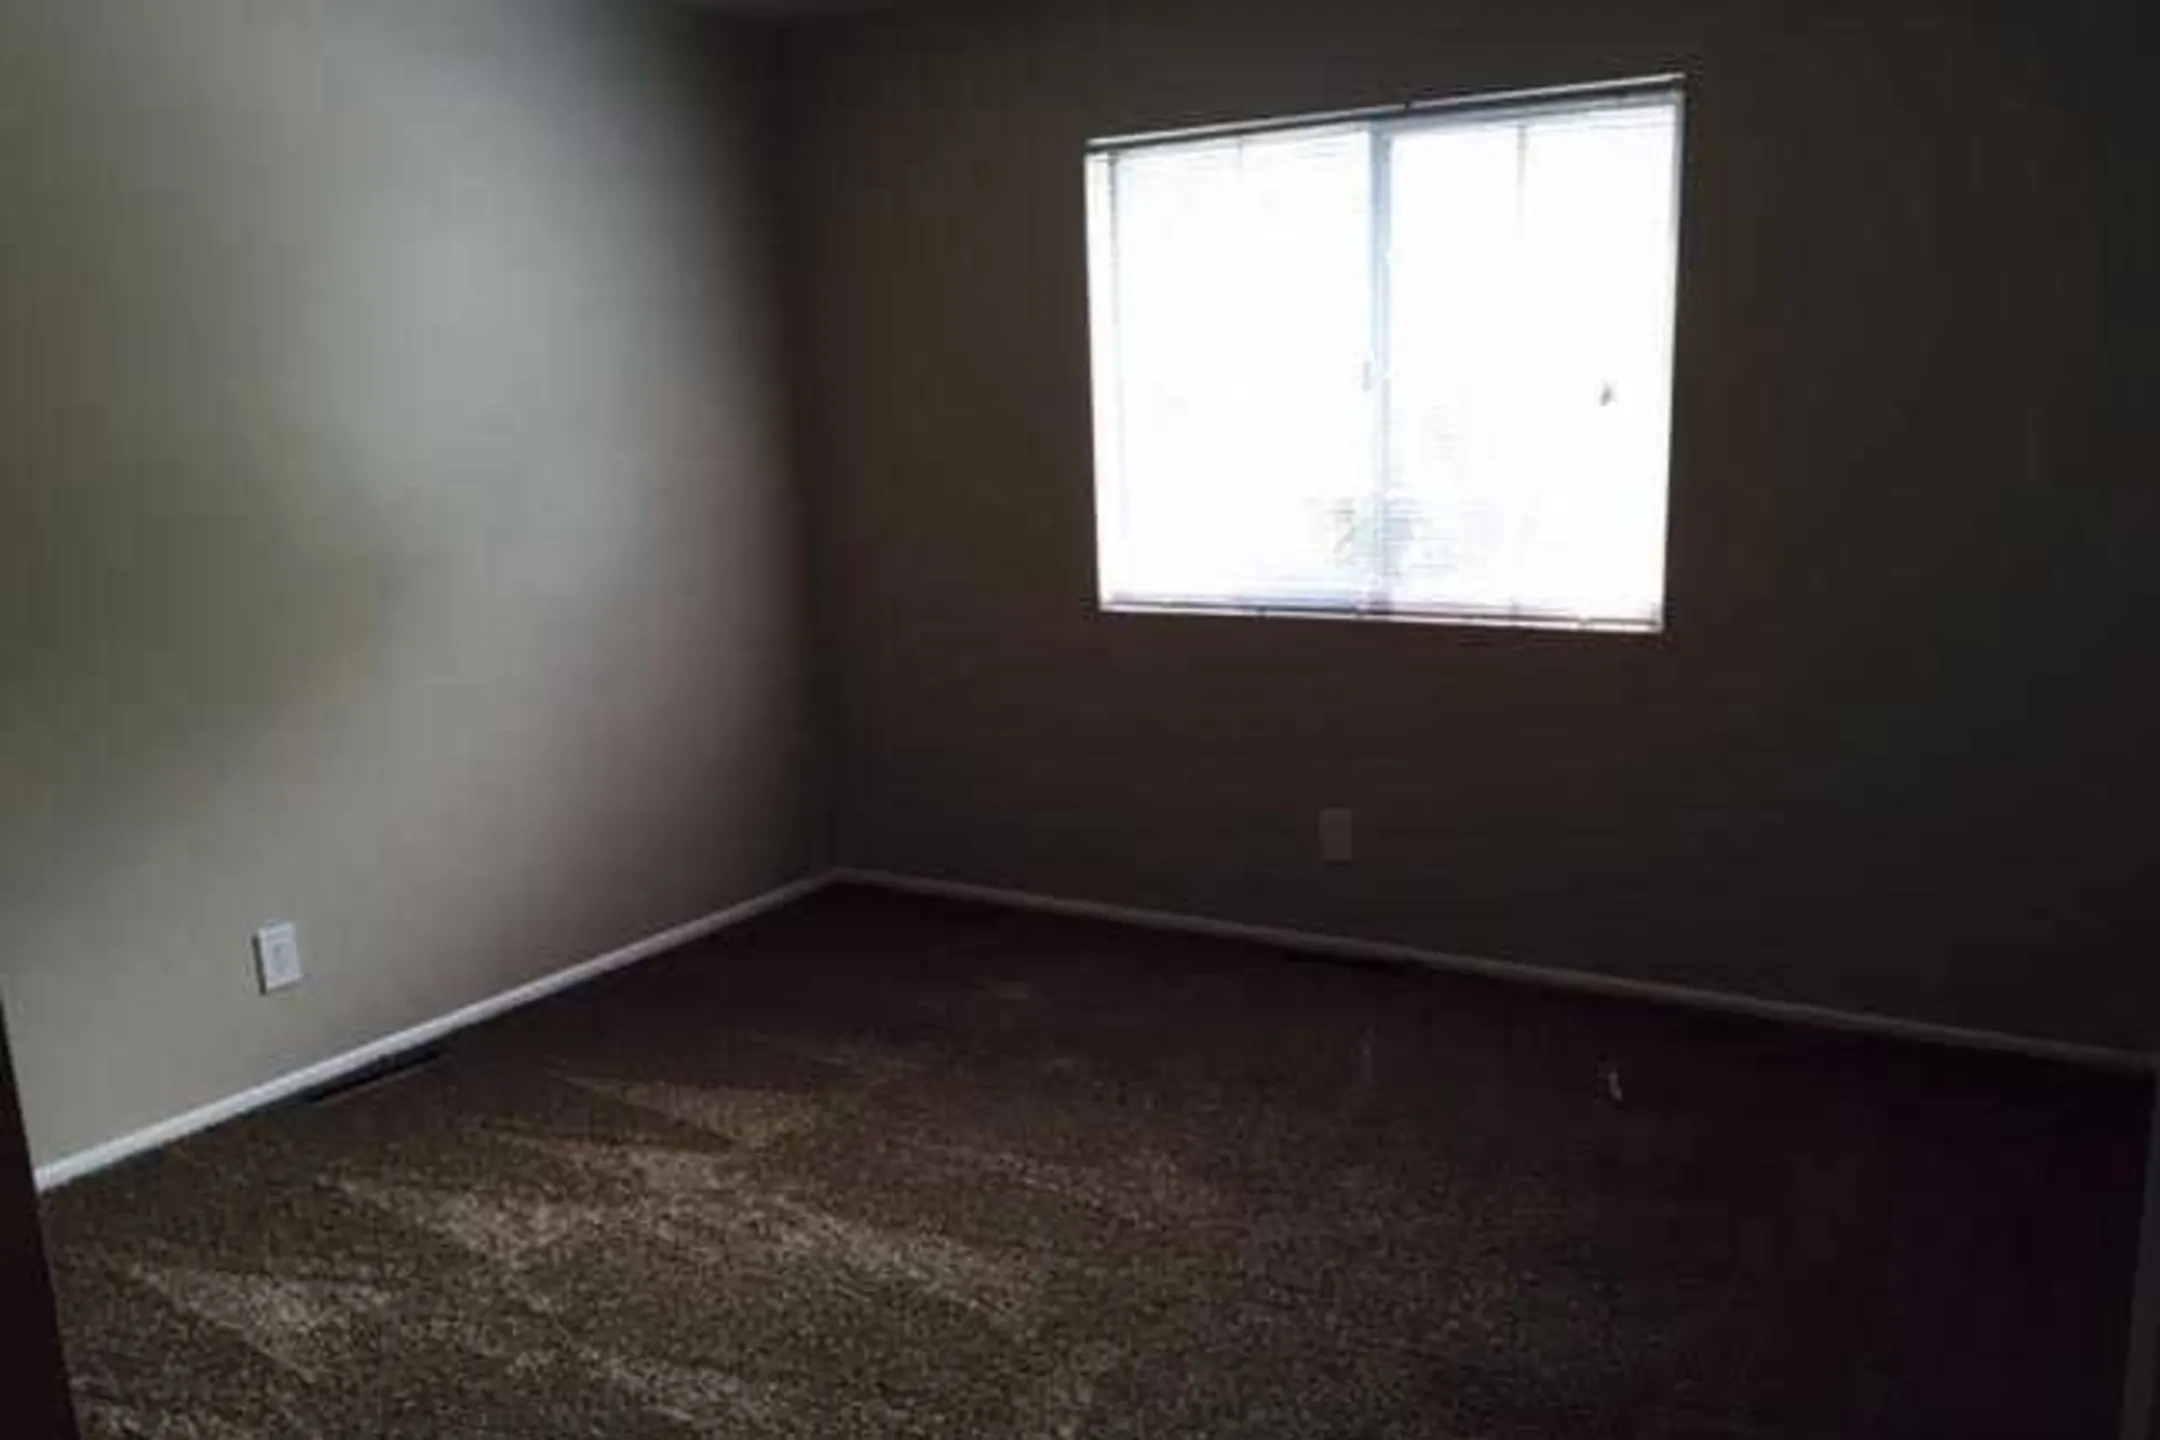 Bedroom - Monticello Apartments & Townhomes - Youngstown, OH